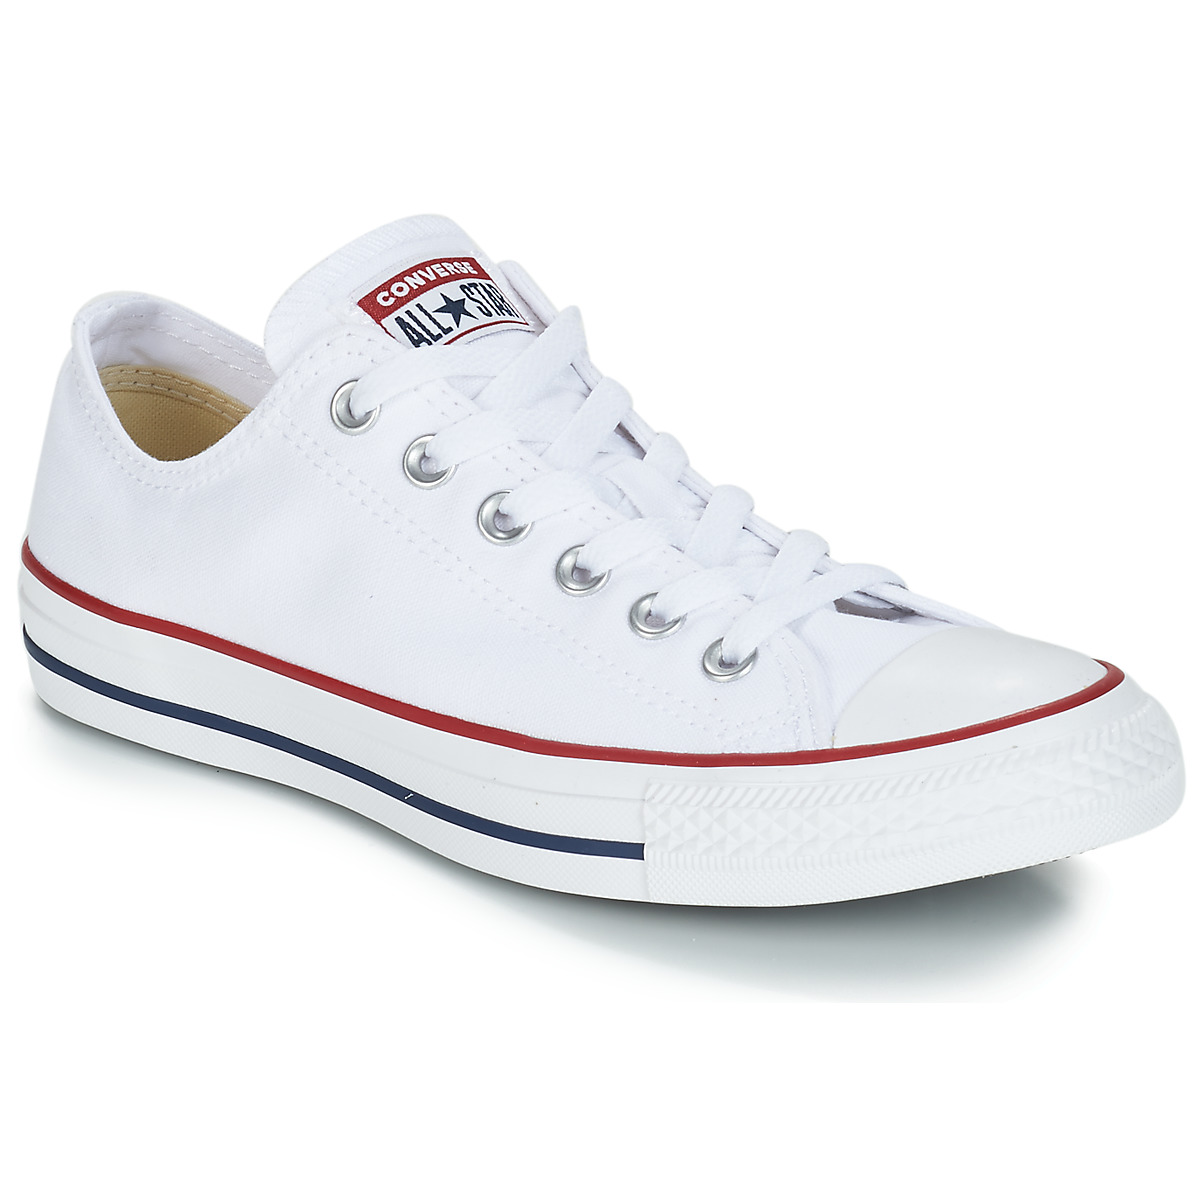 Exclamation point complexity know Converse Tom Tailor Deals, SAVE 59%.